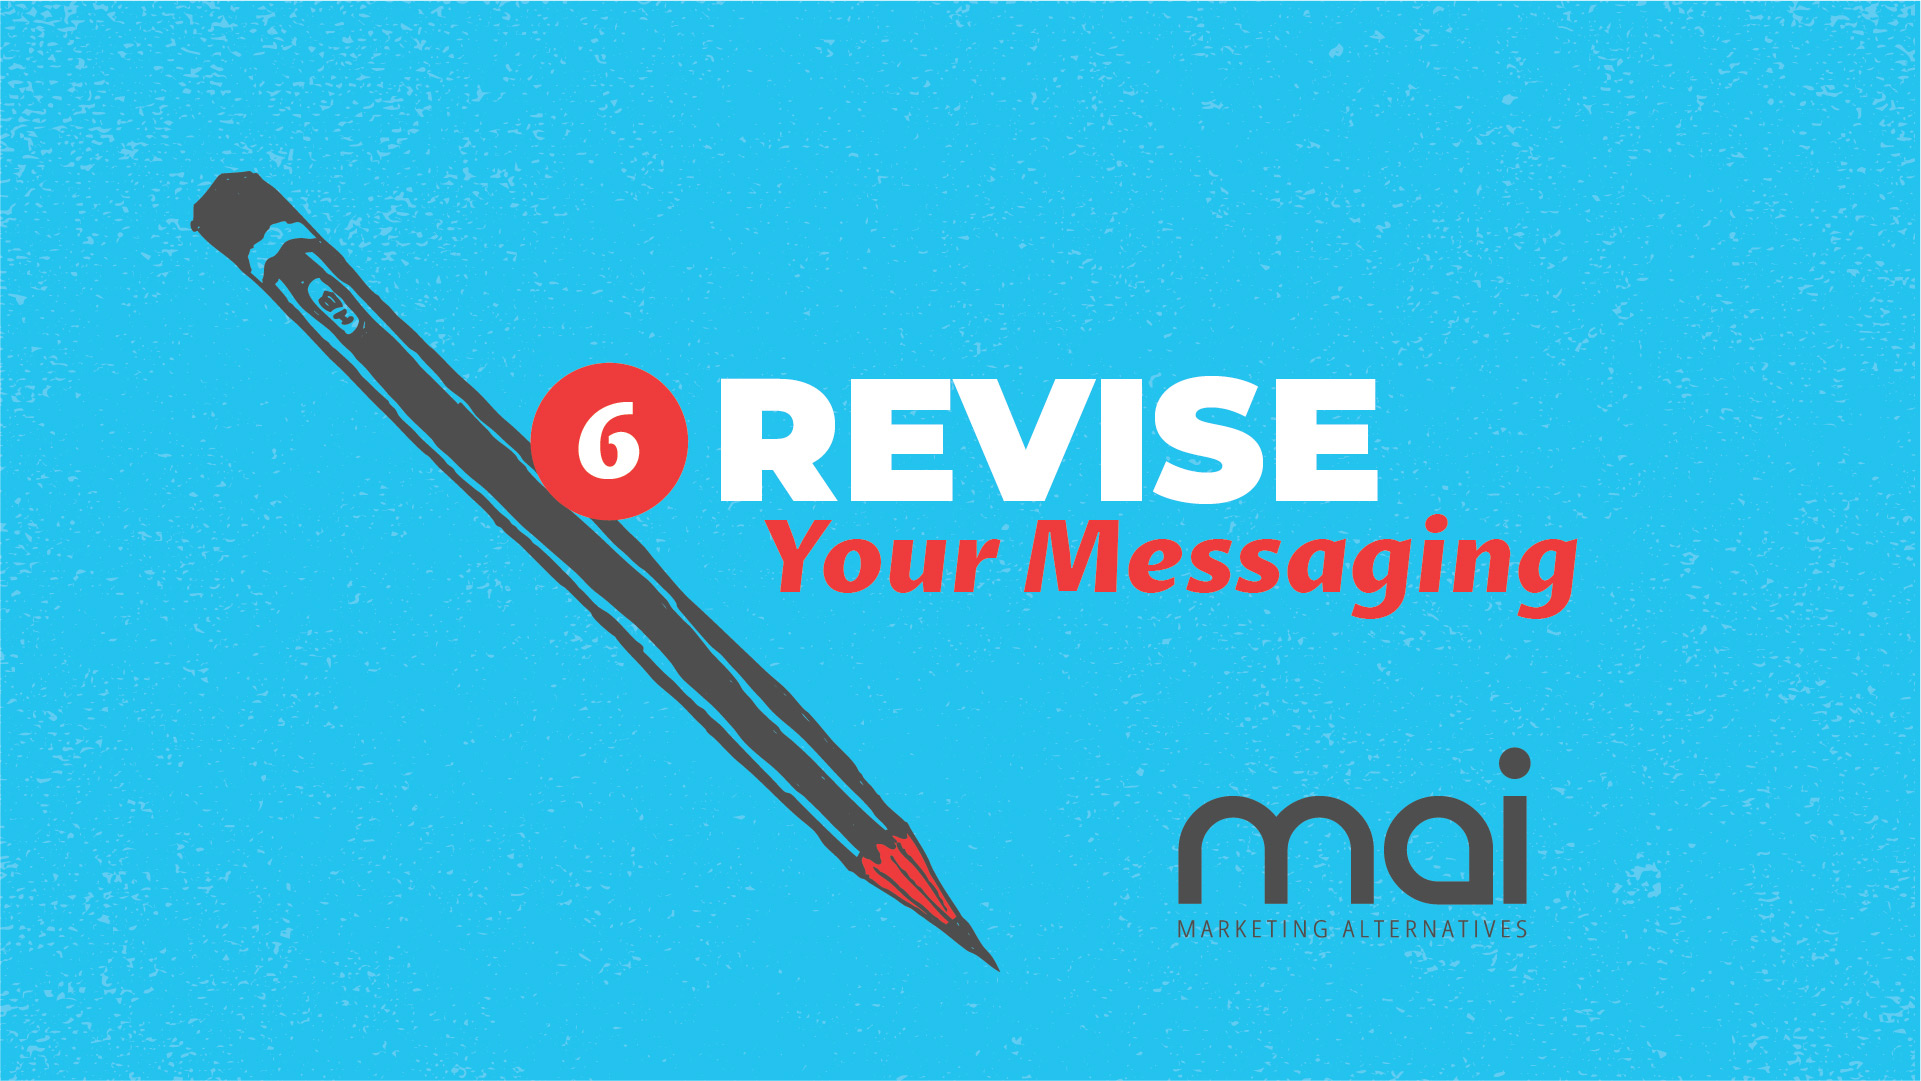 Revise Your Messaging